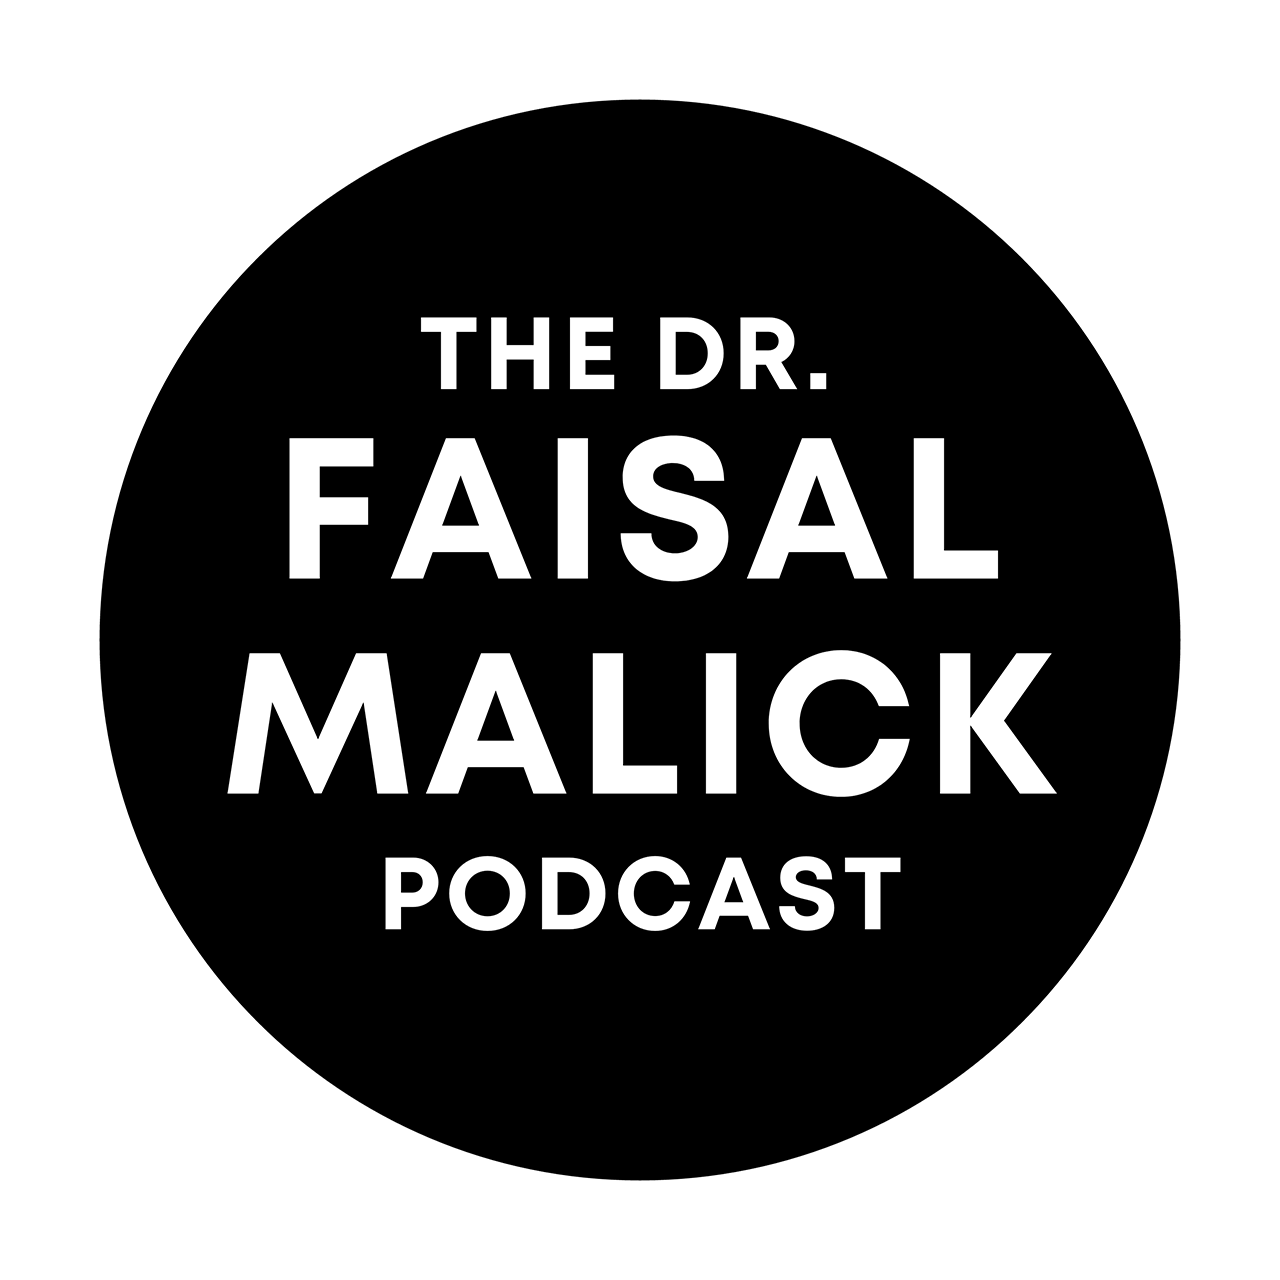 The Dr. Faisal Malick Podcast